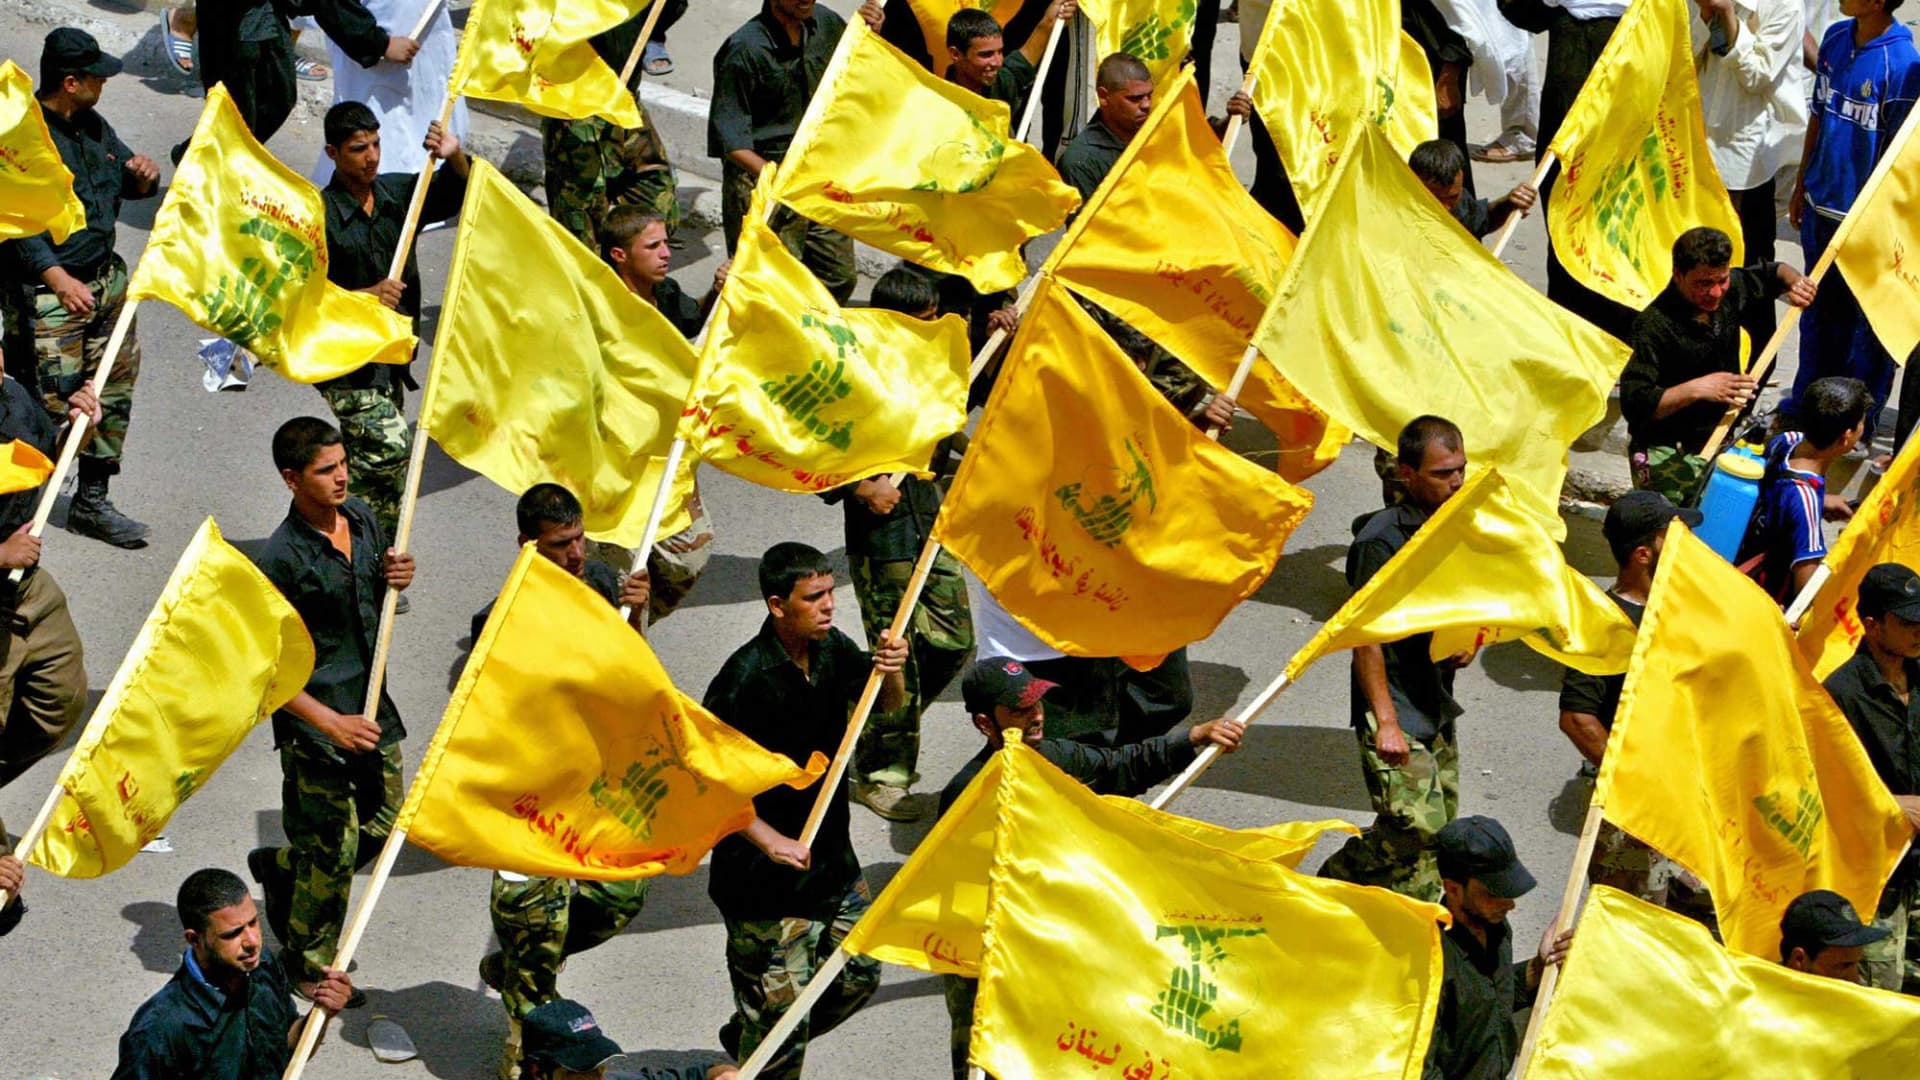 Members of the Shiite Mehdi army militia carry Lebanese Hezbollah flags as they rally in Baghdad's neighborhood of Sadr City in 2006.